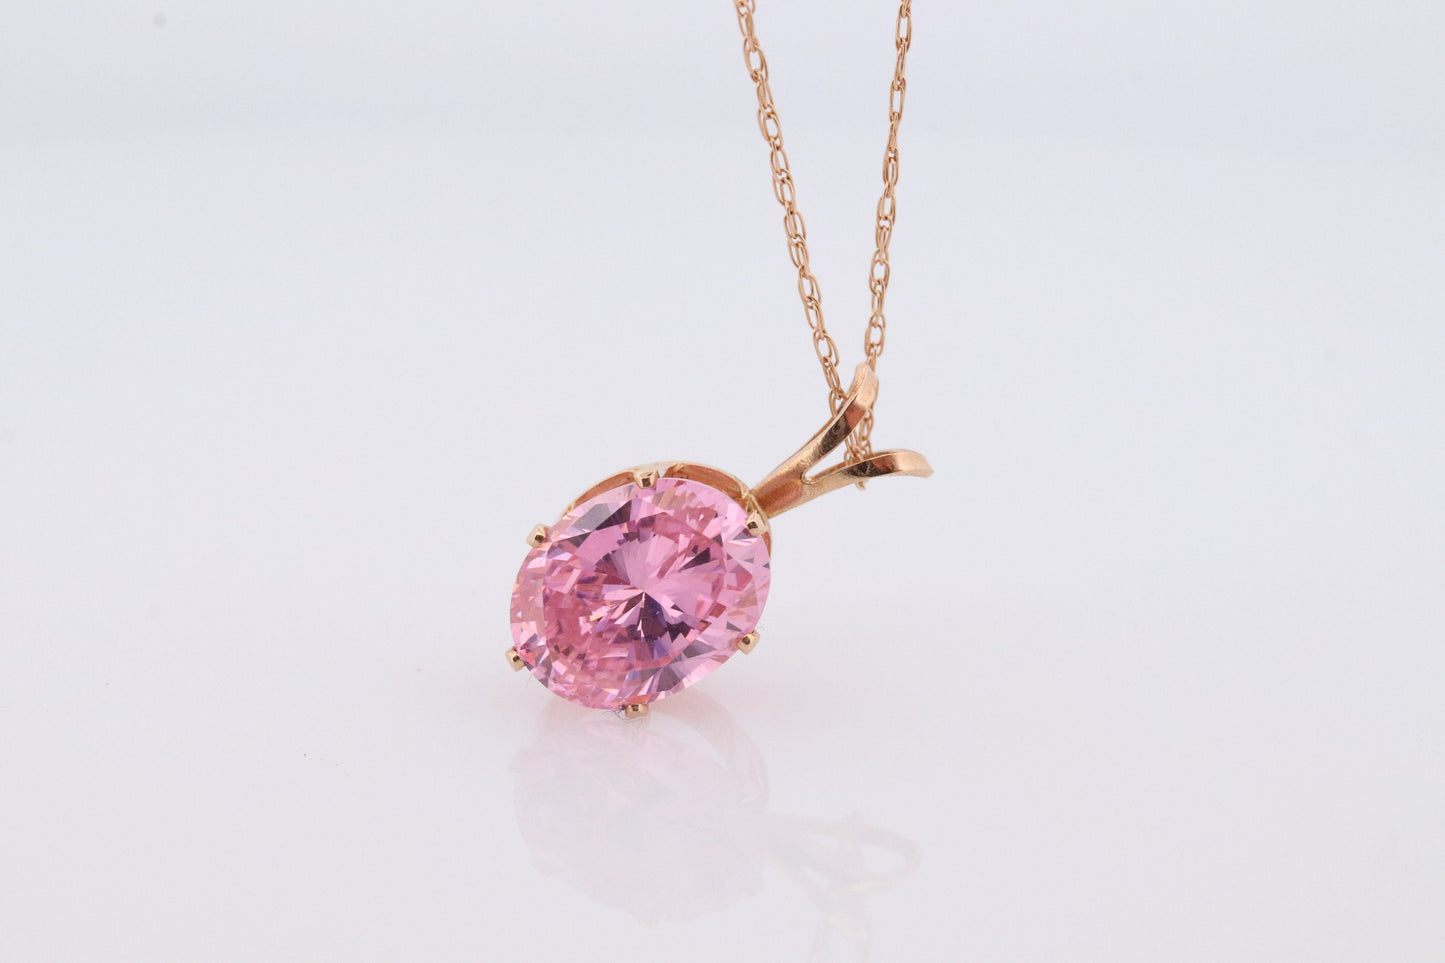 10k PINK peach Diamond(CZ) Solitaire Pendant. 18in Chain Necklace. 10k Large Light Pink oval CZ pendant Gift. st(42)